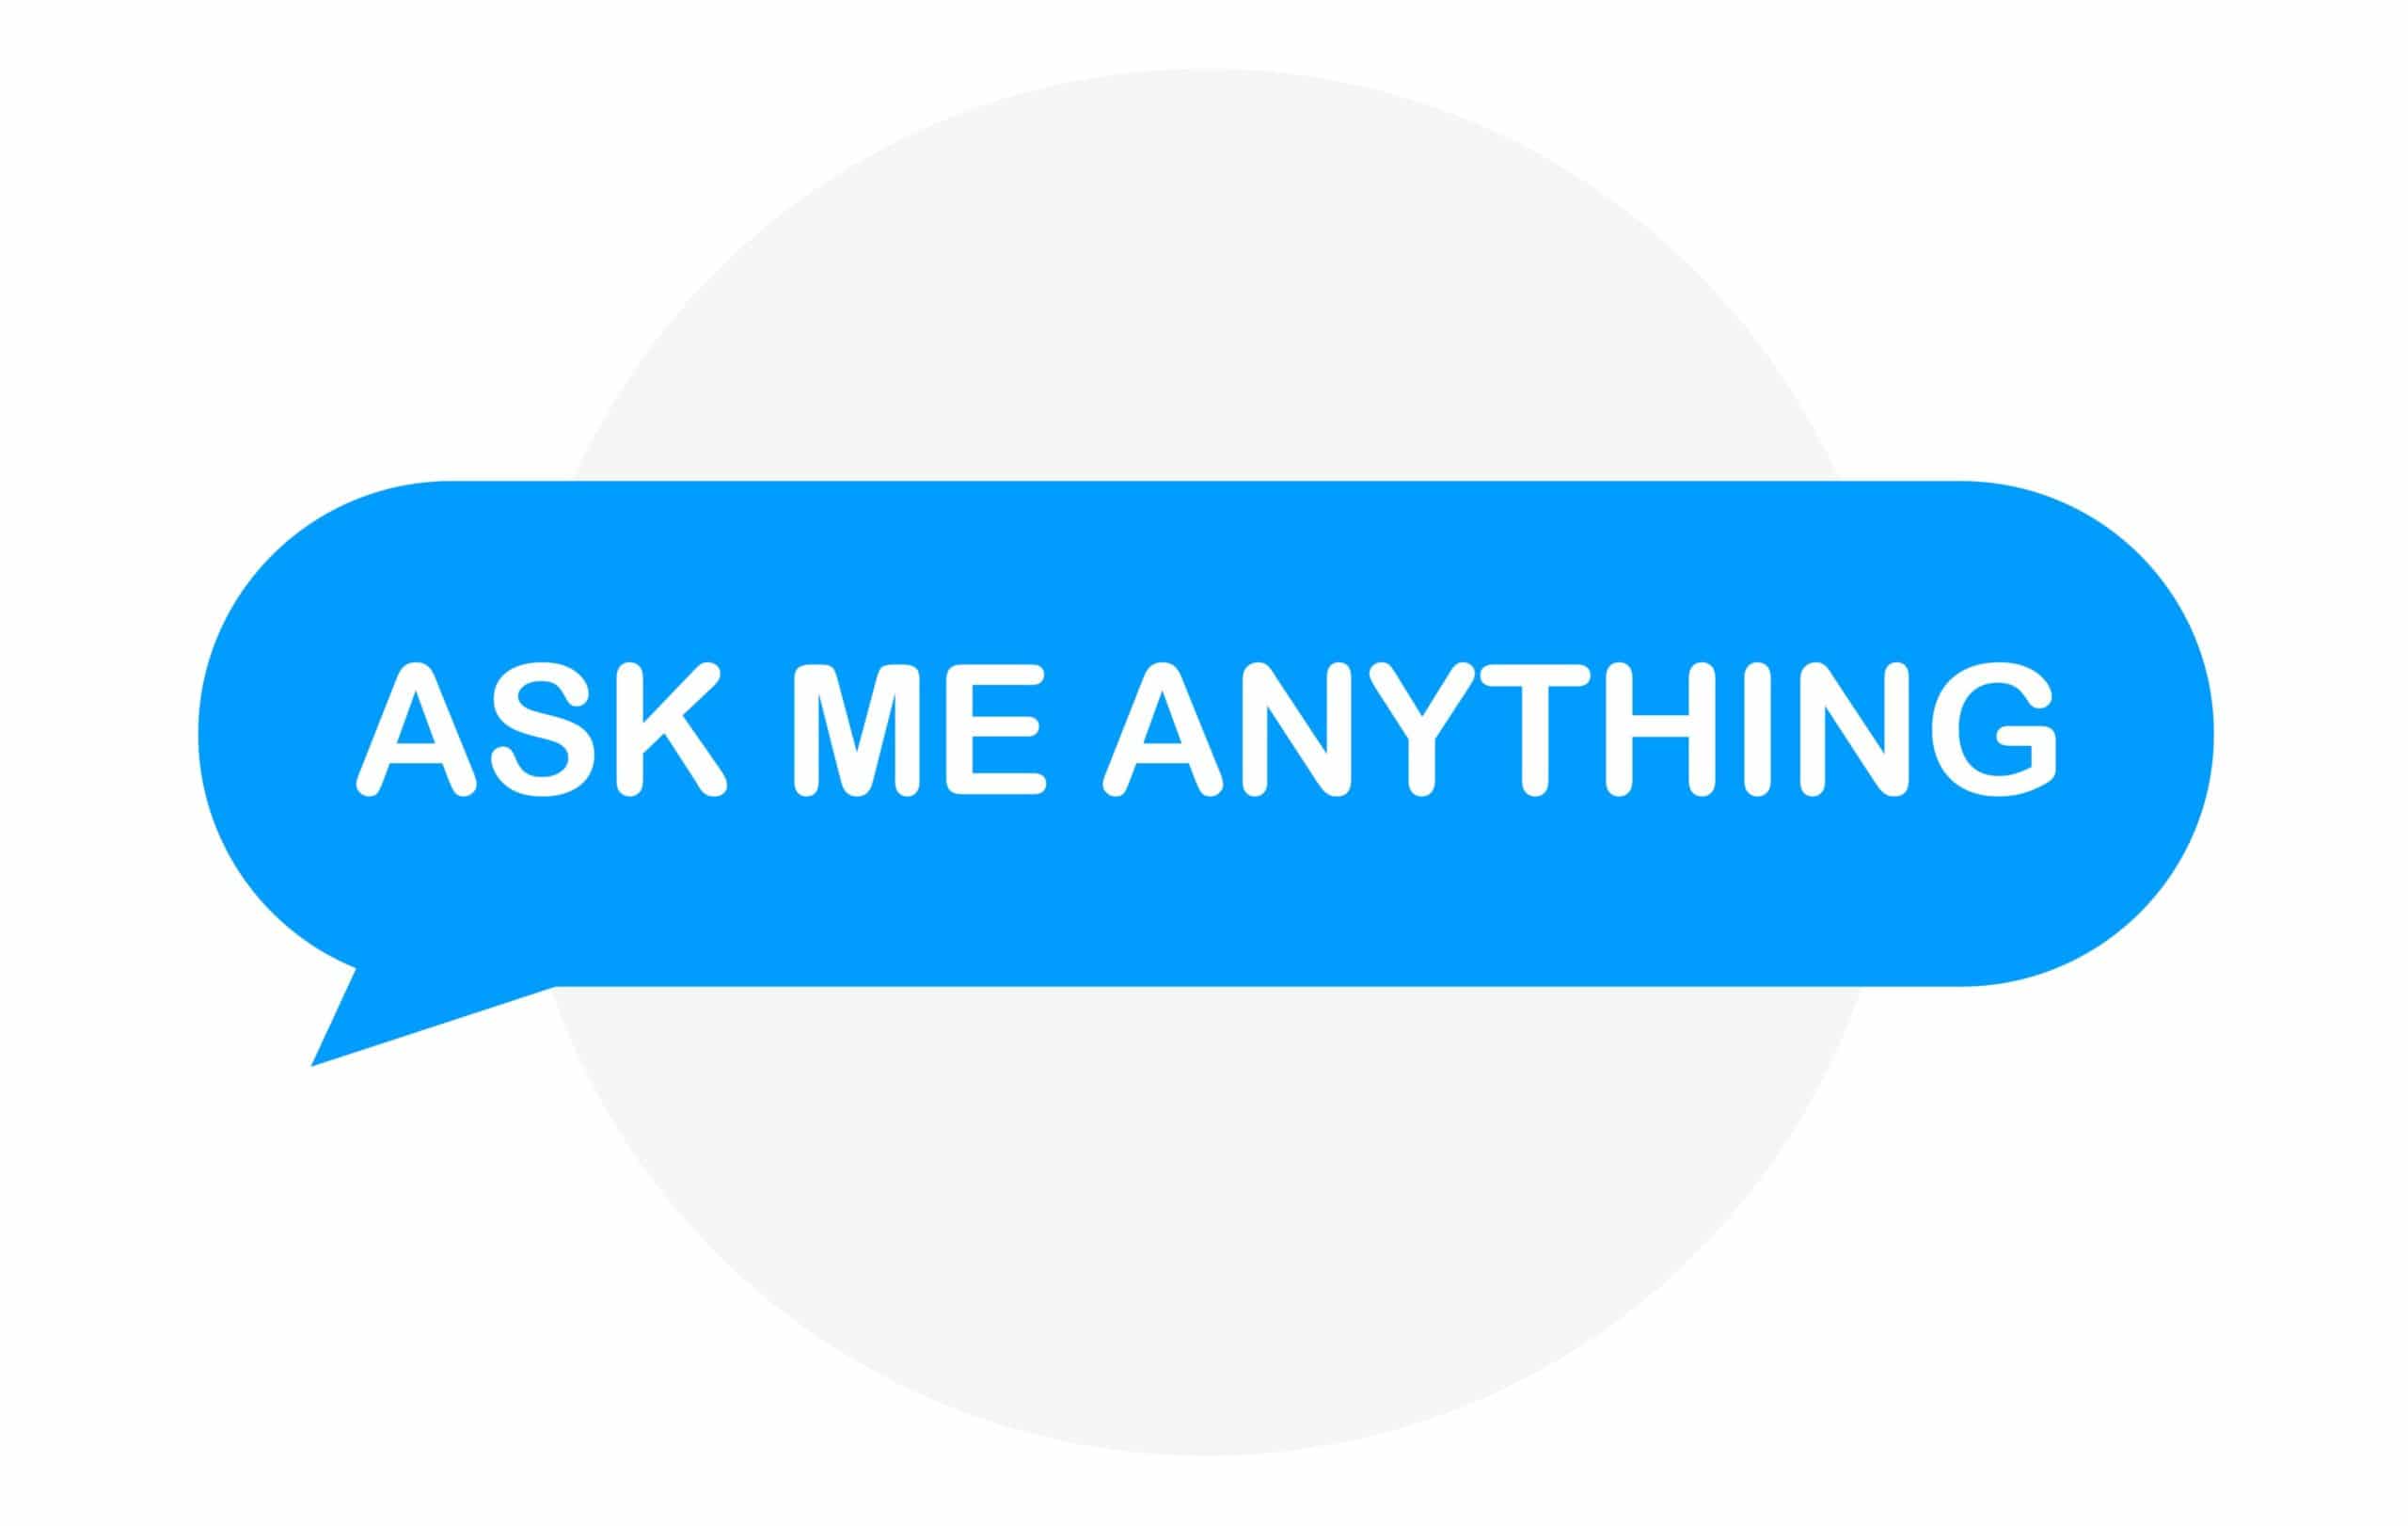 NLP augmented analytics is like Ask Me Anything with your data